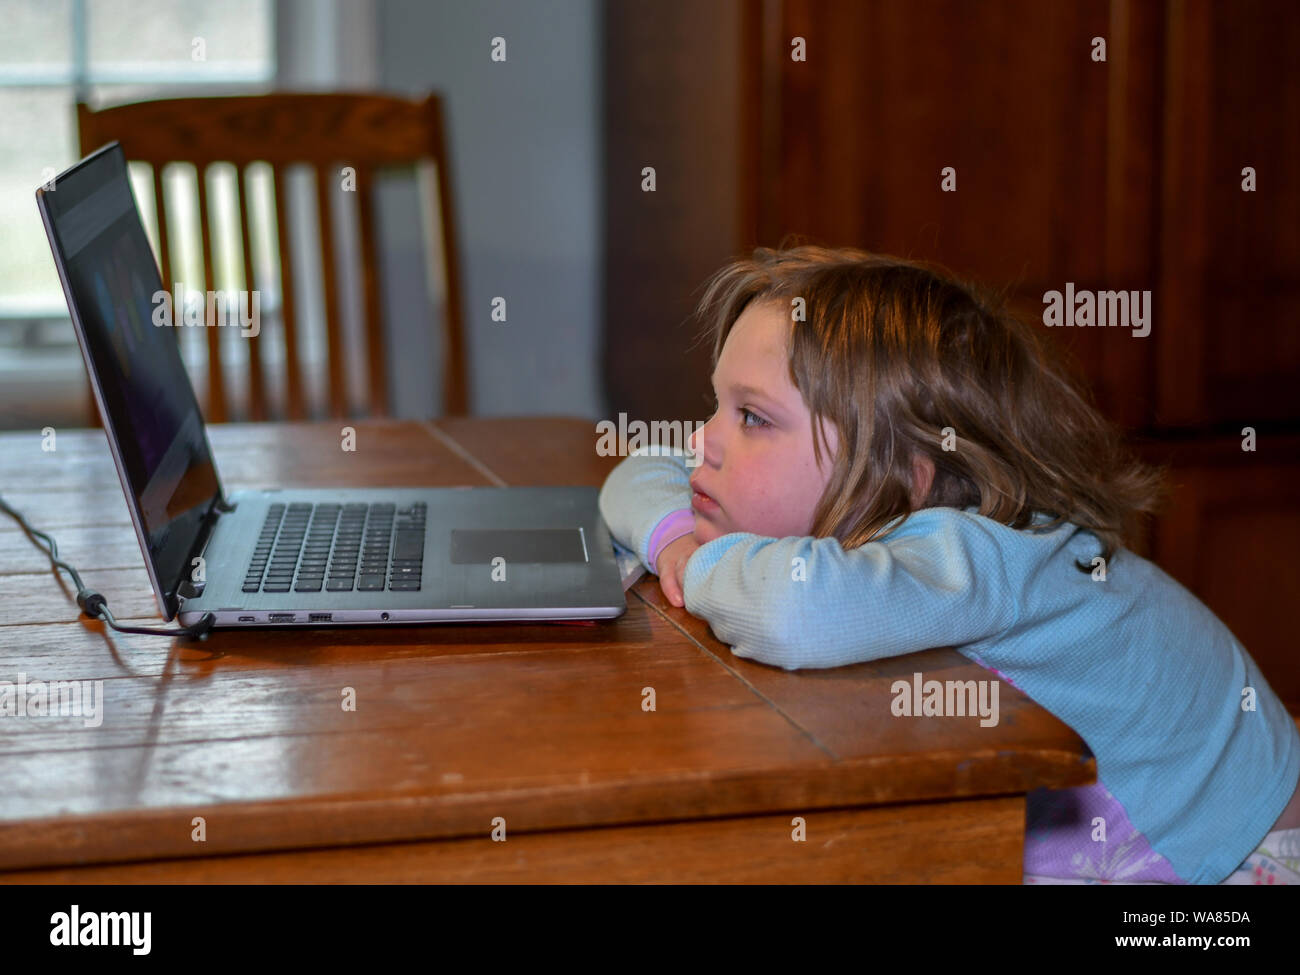 child in her pajamas relaxes at the table with grandma's laptop, watching kids song videos Stock Photo